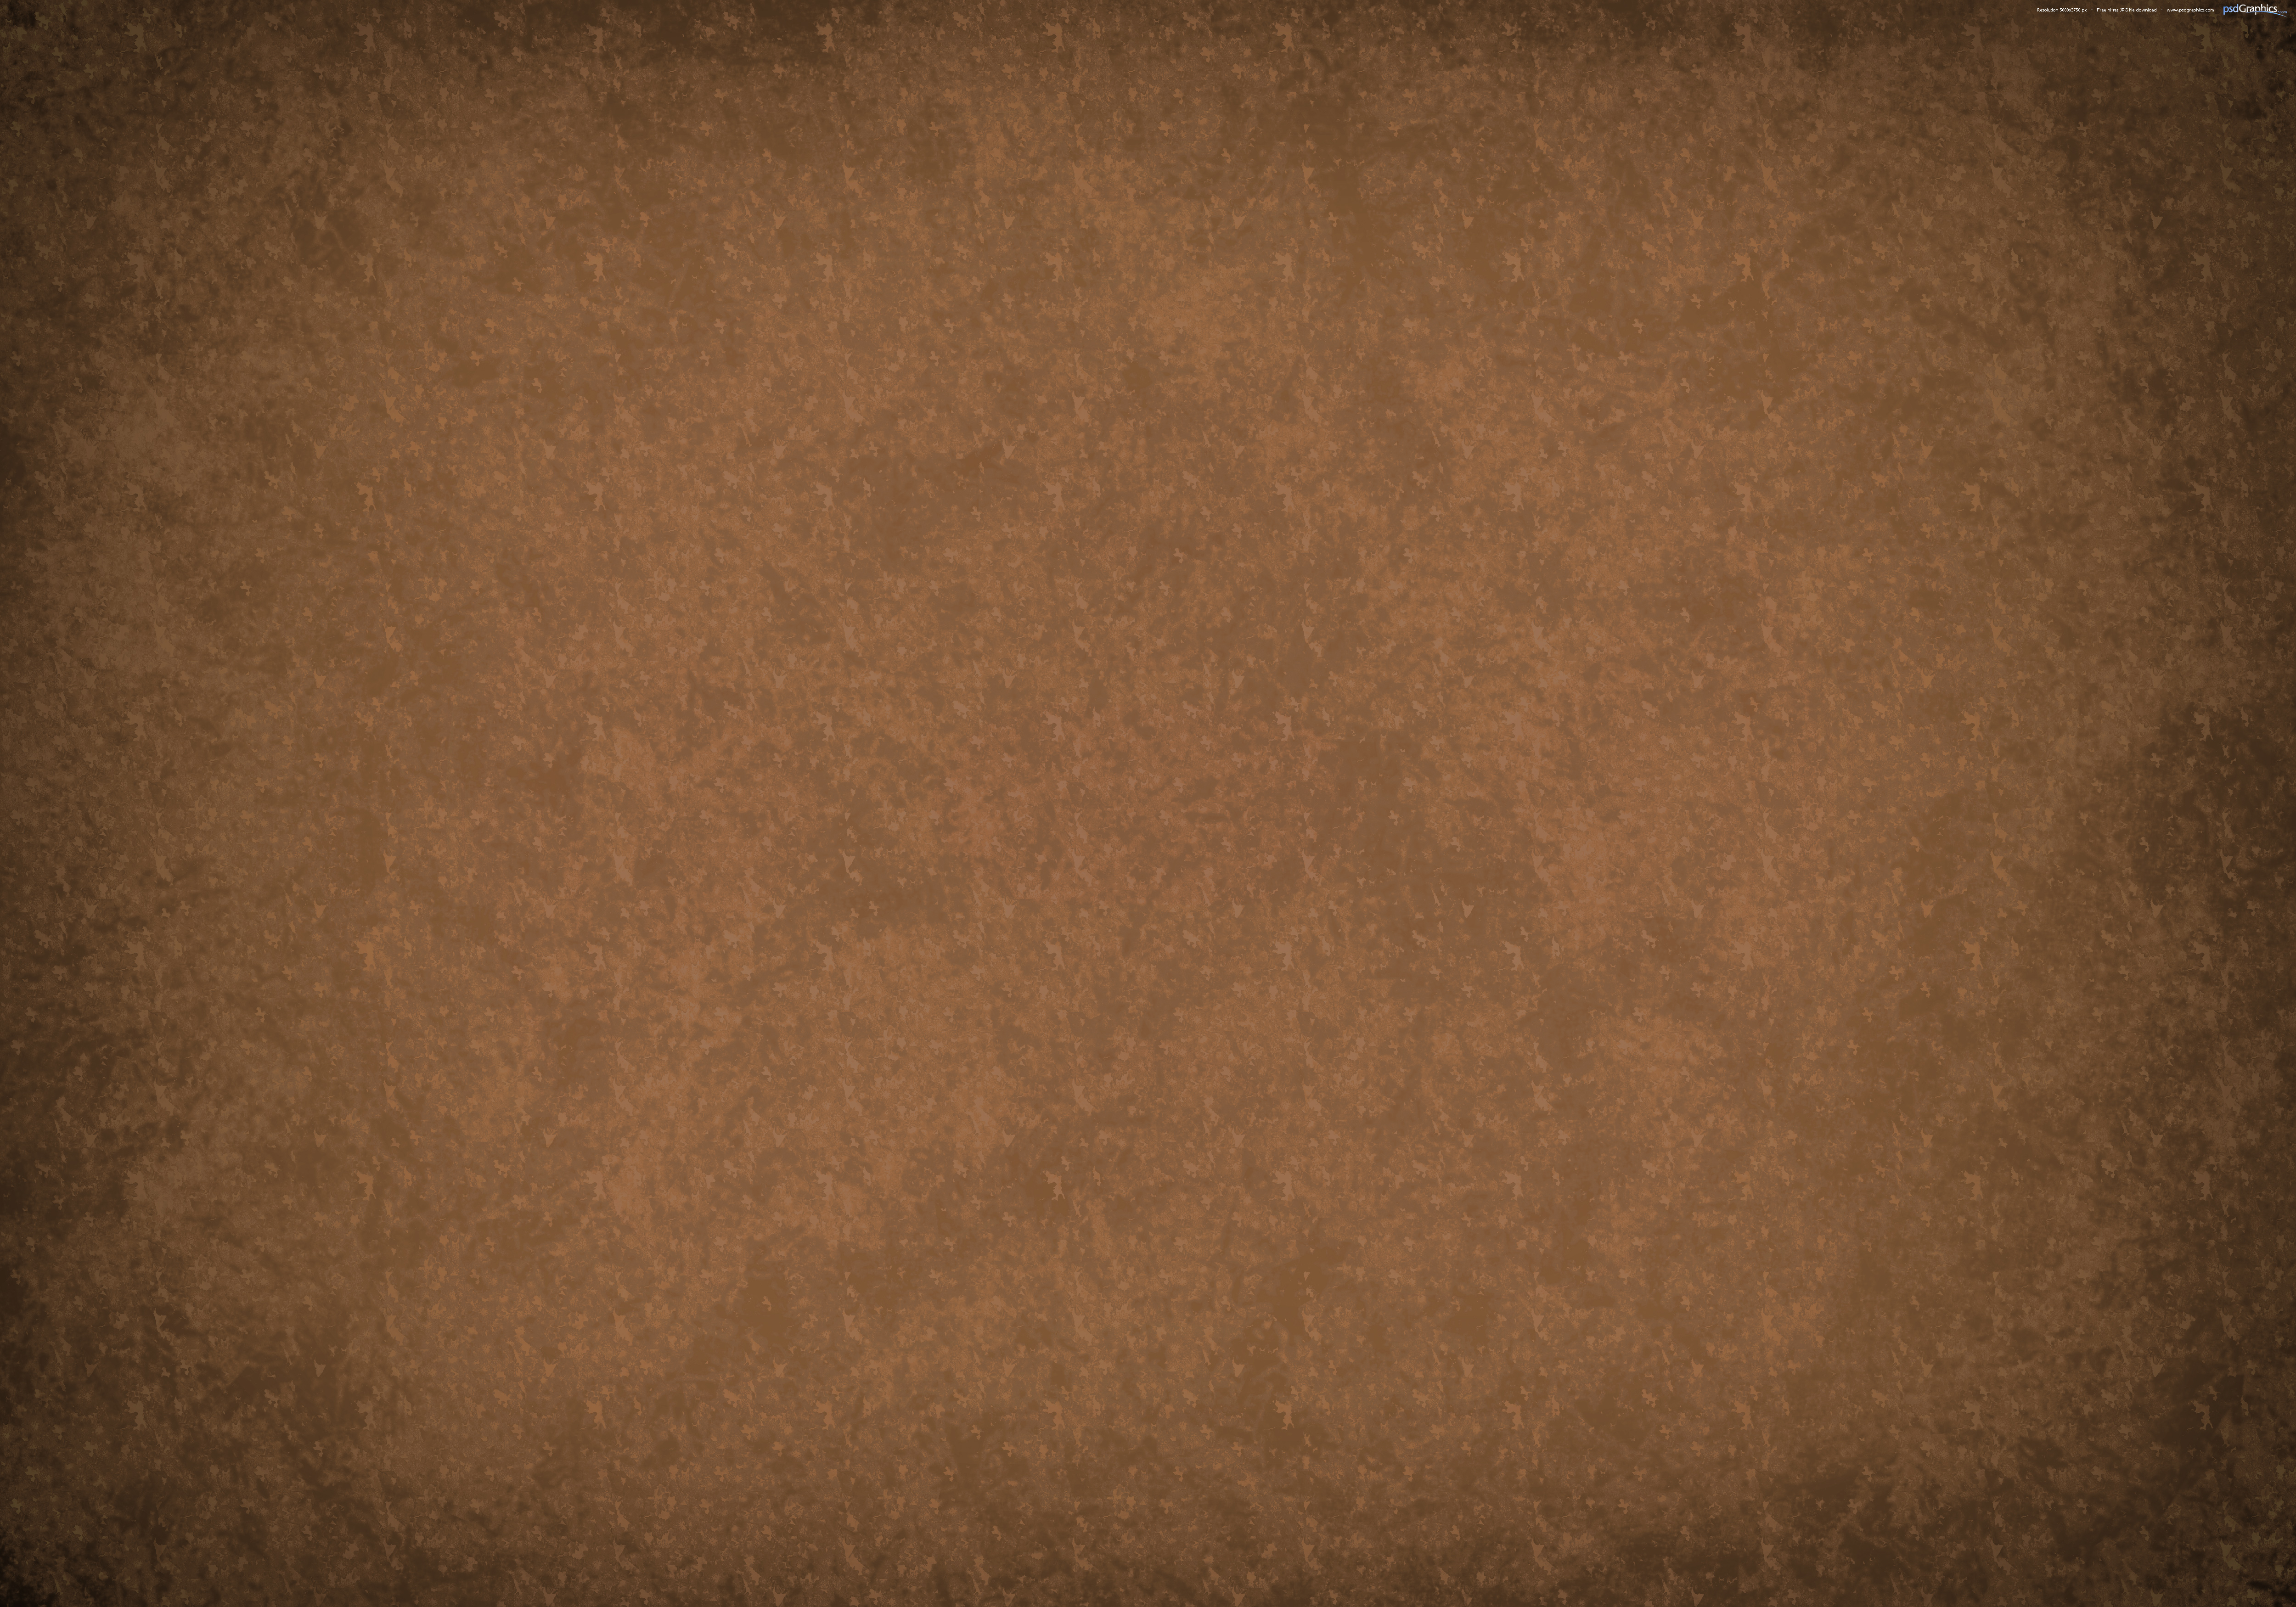 Red and brown grunge backgrounds PSDGraphics 5000x3500